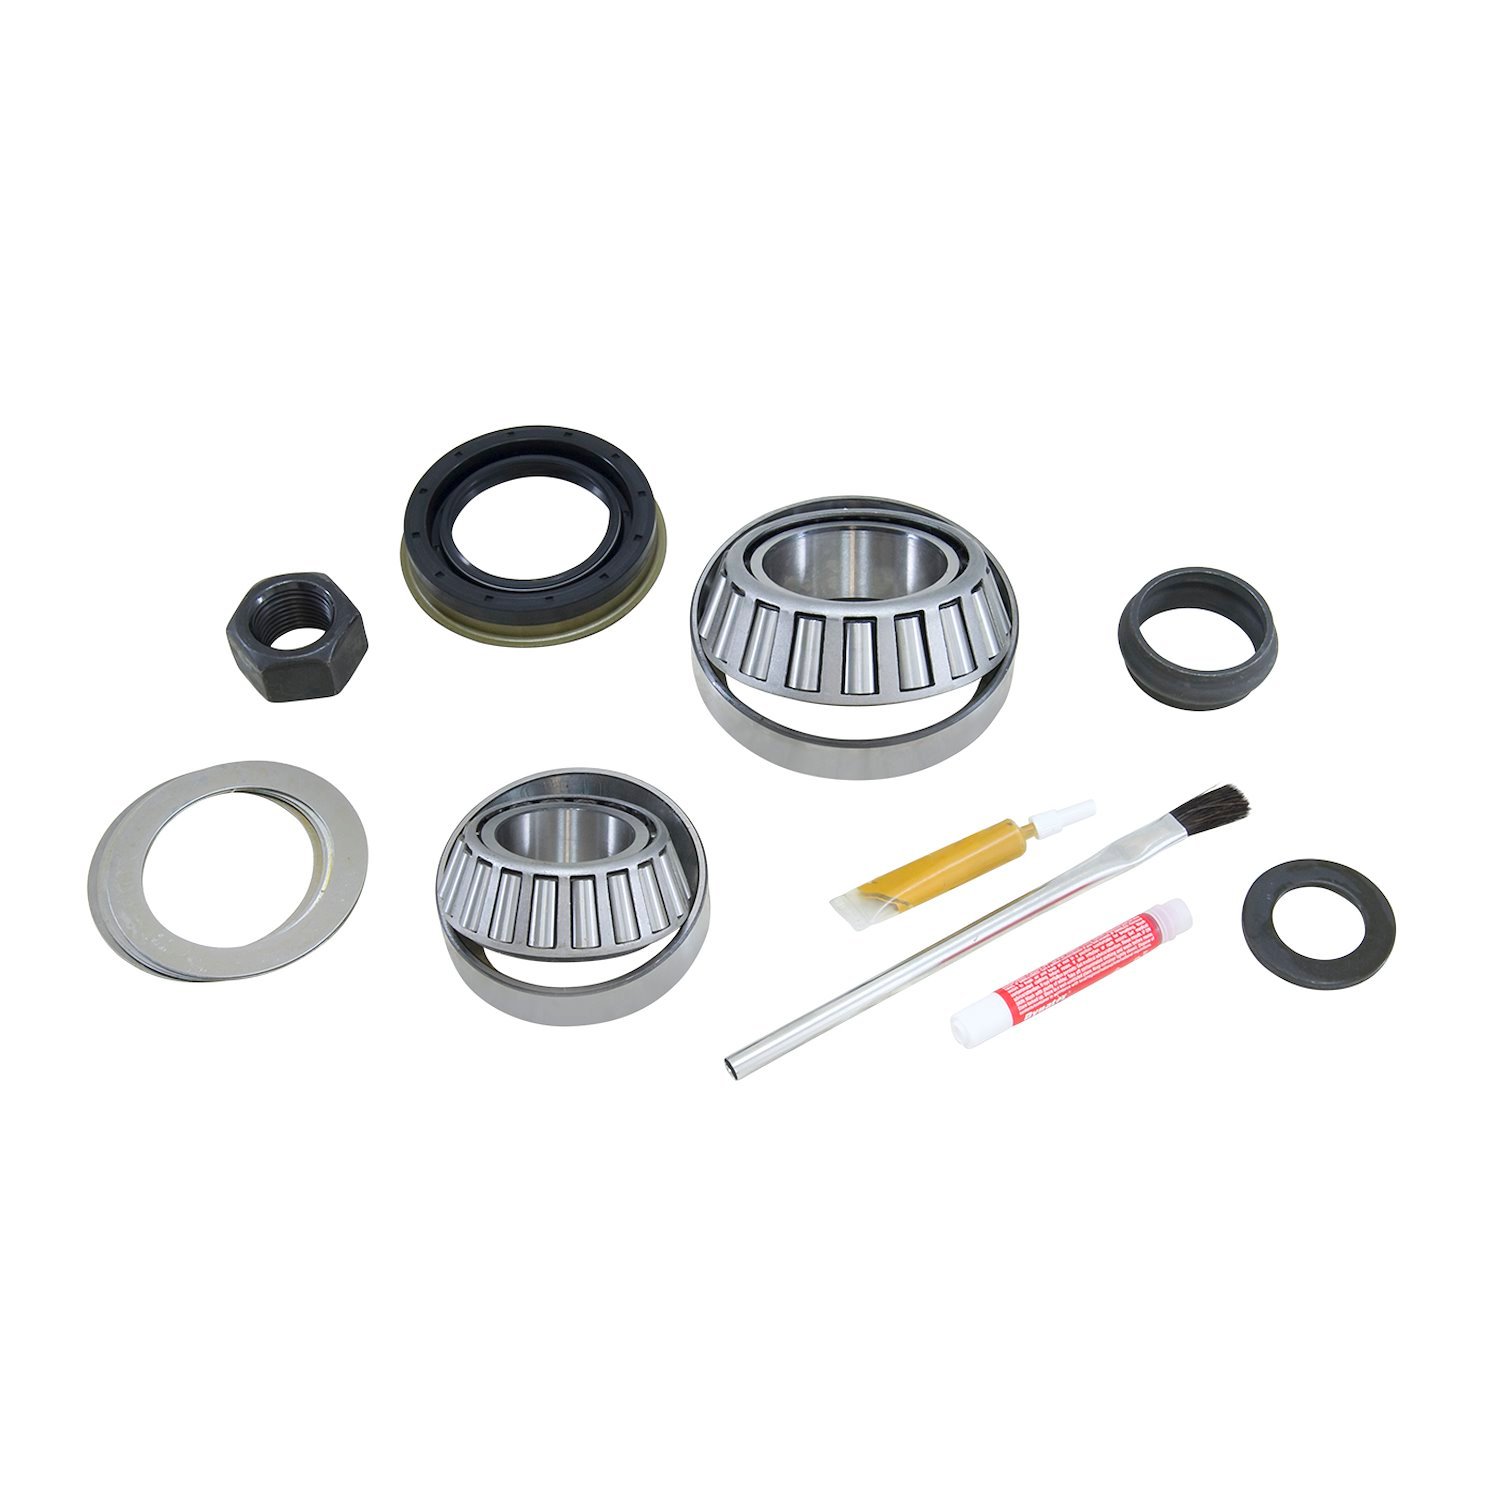 Pinion Install Kit For Dana 30 Short Pinion Front Diff, Standard Rotation